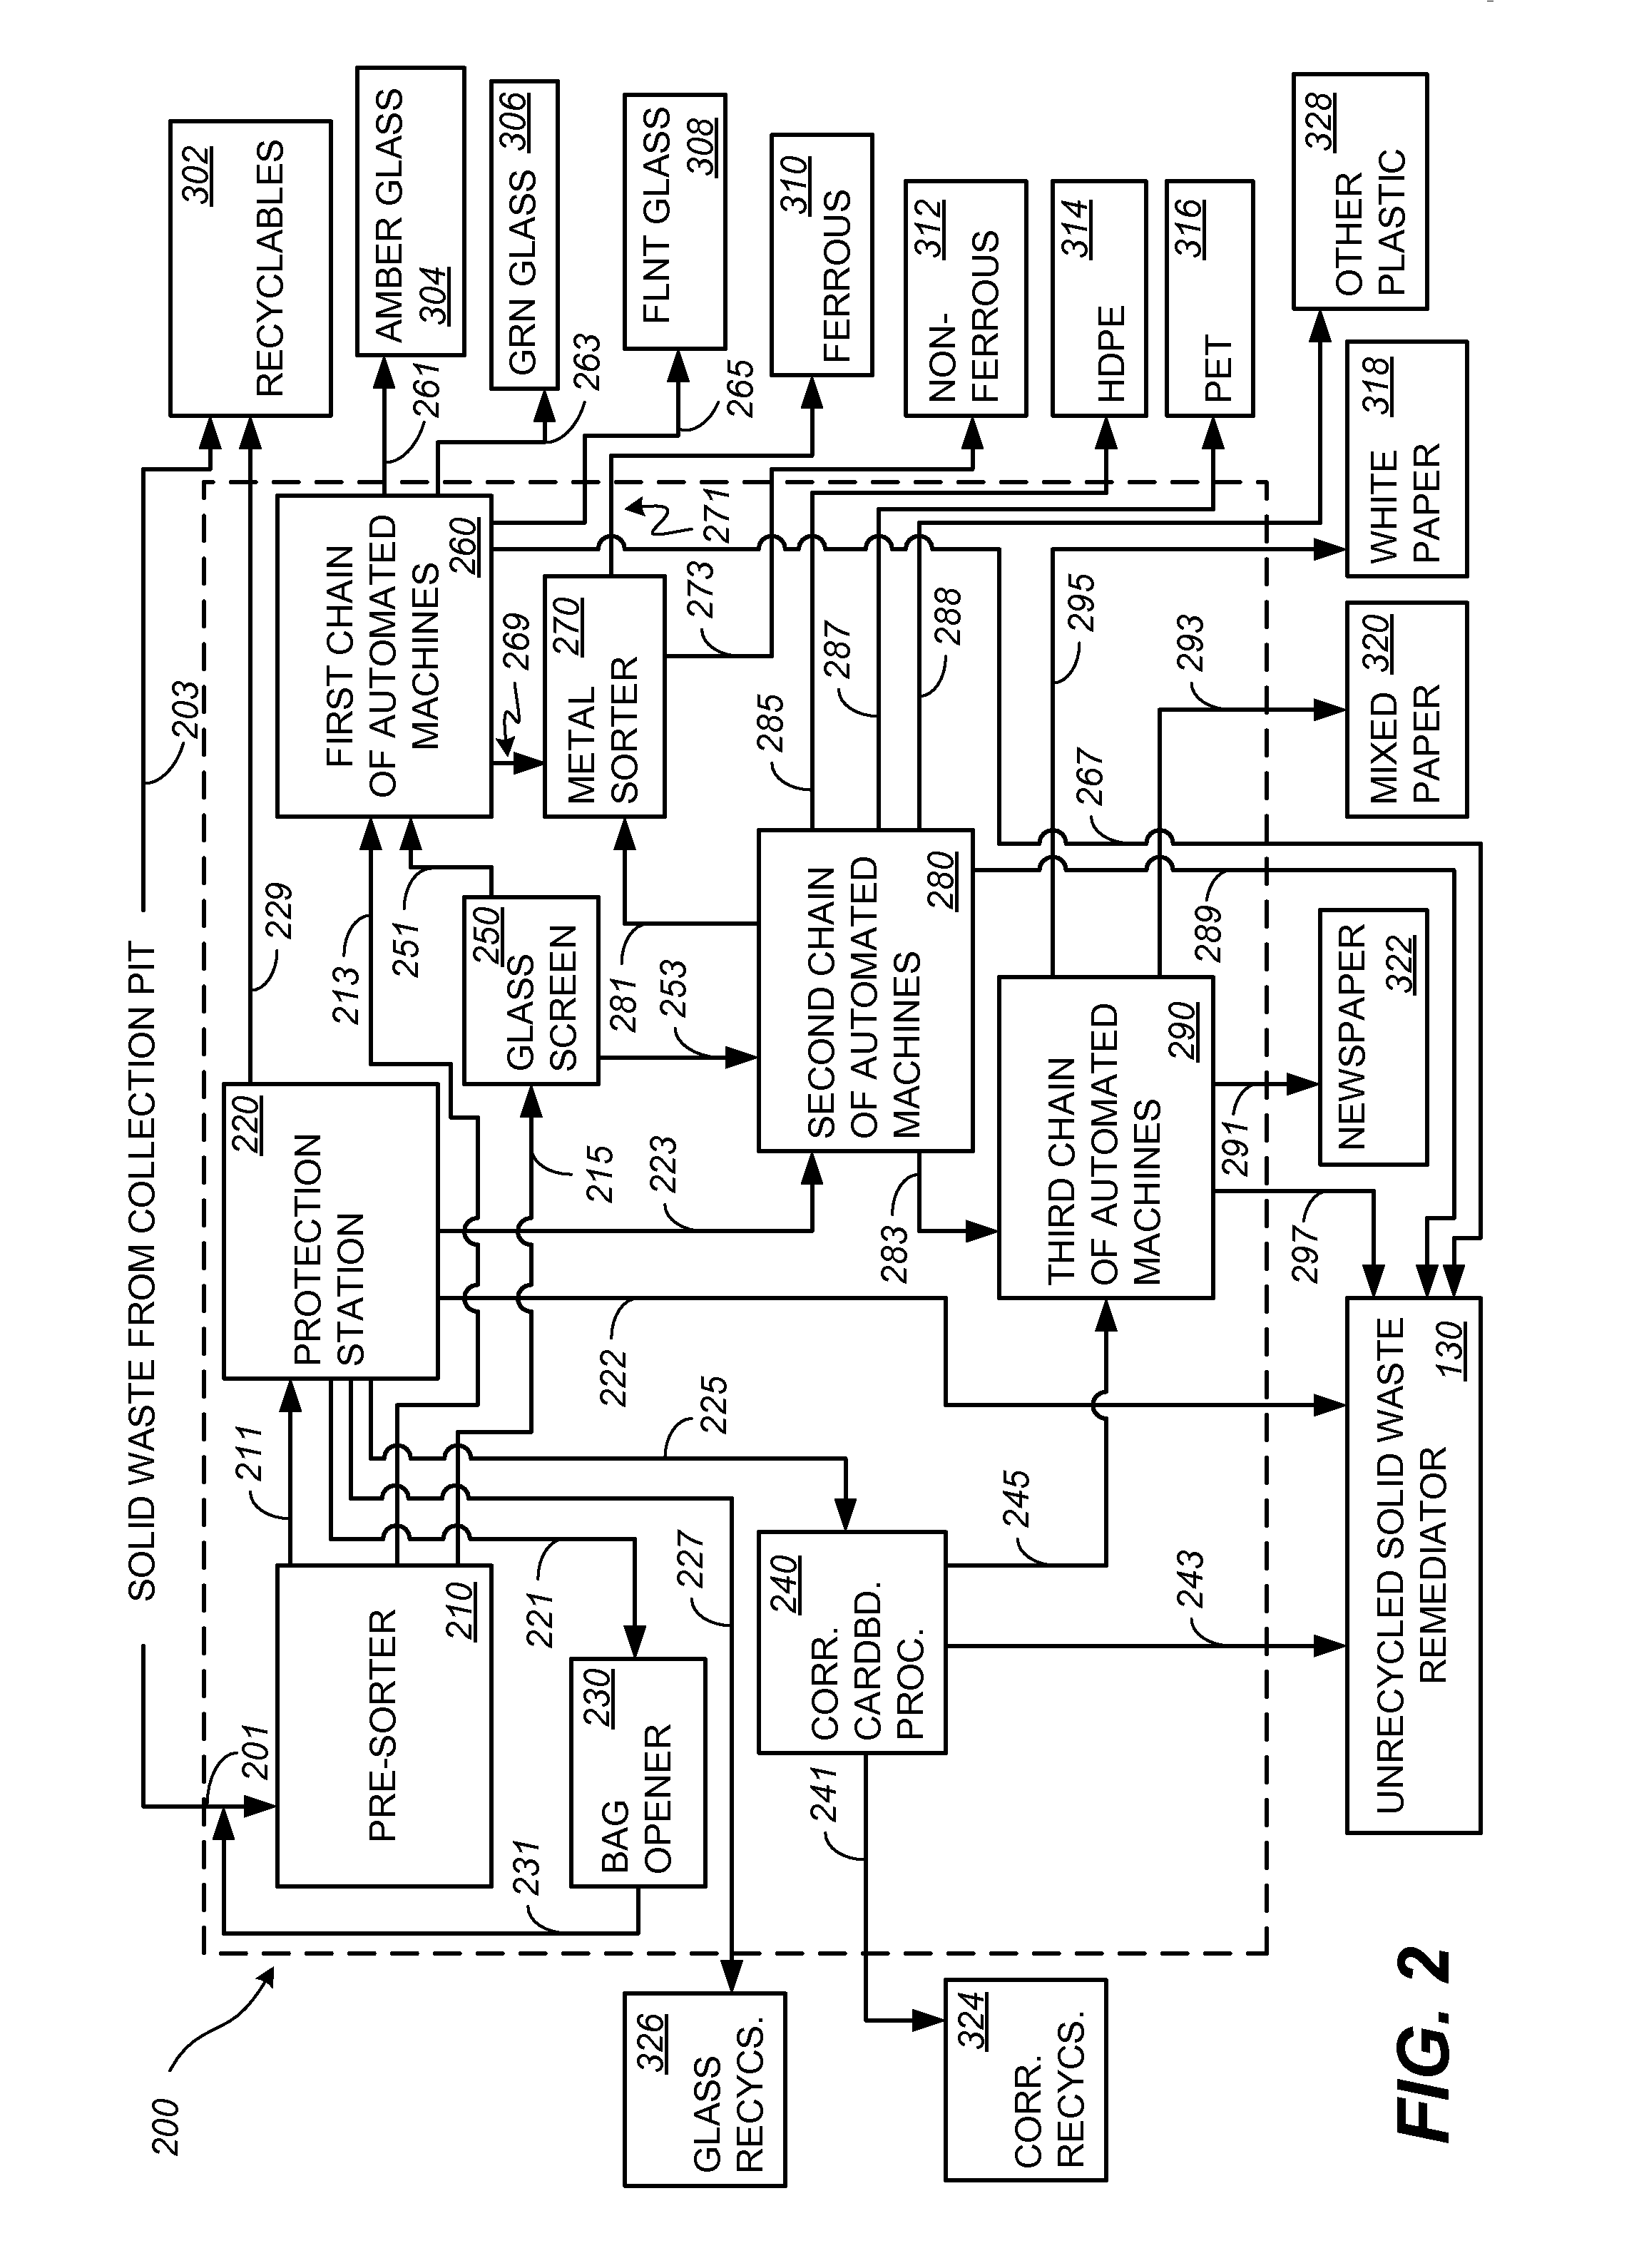 Systems and Methods for Processing Municipal Solid Waste